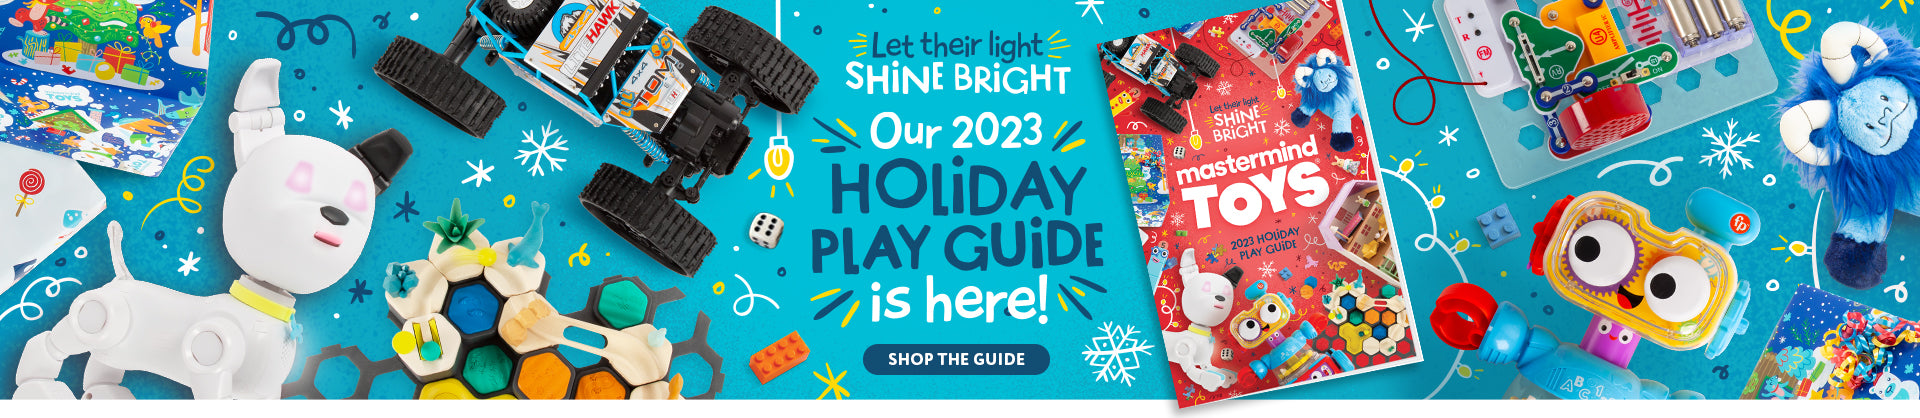 Let their light shine bright.  Our 2023 Holiday Play Guide is here.  Shop the Guide.